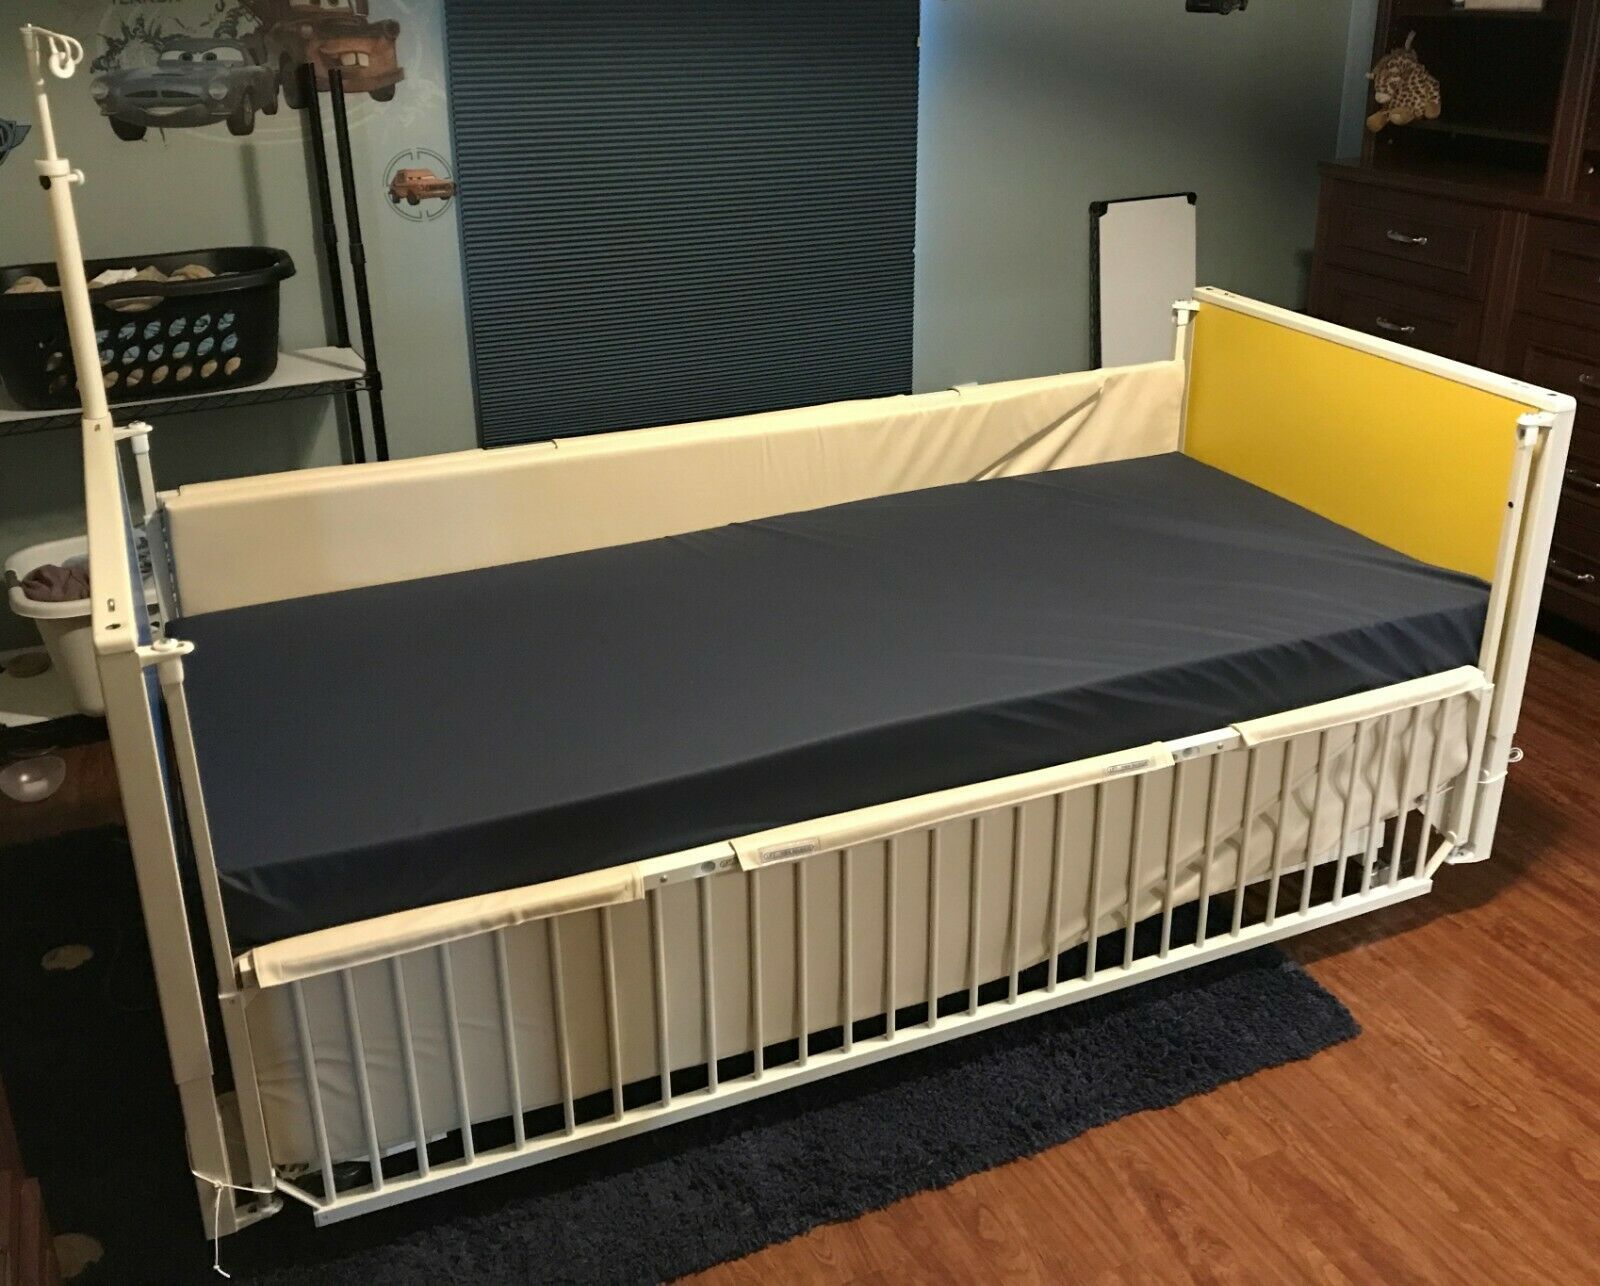 Special Needs Youth Bed - Electric - Long, For Patients With Limited Mobility